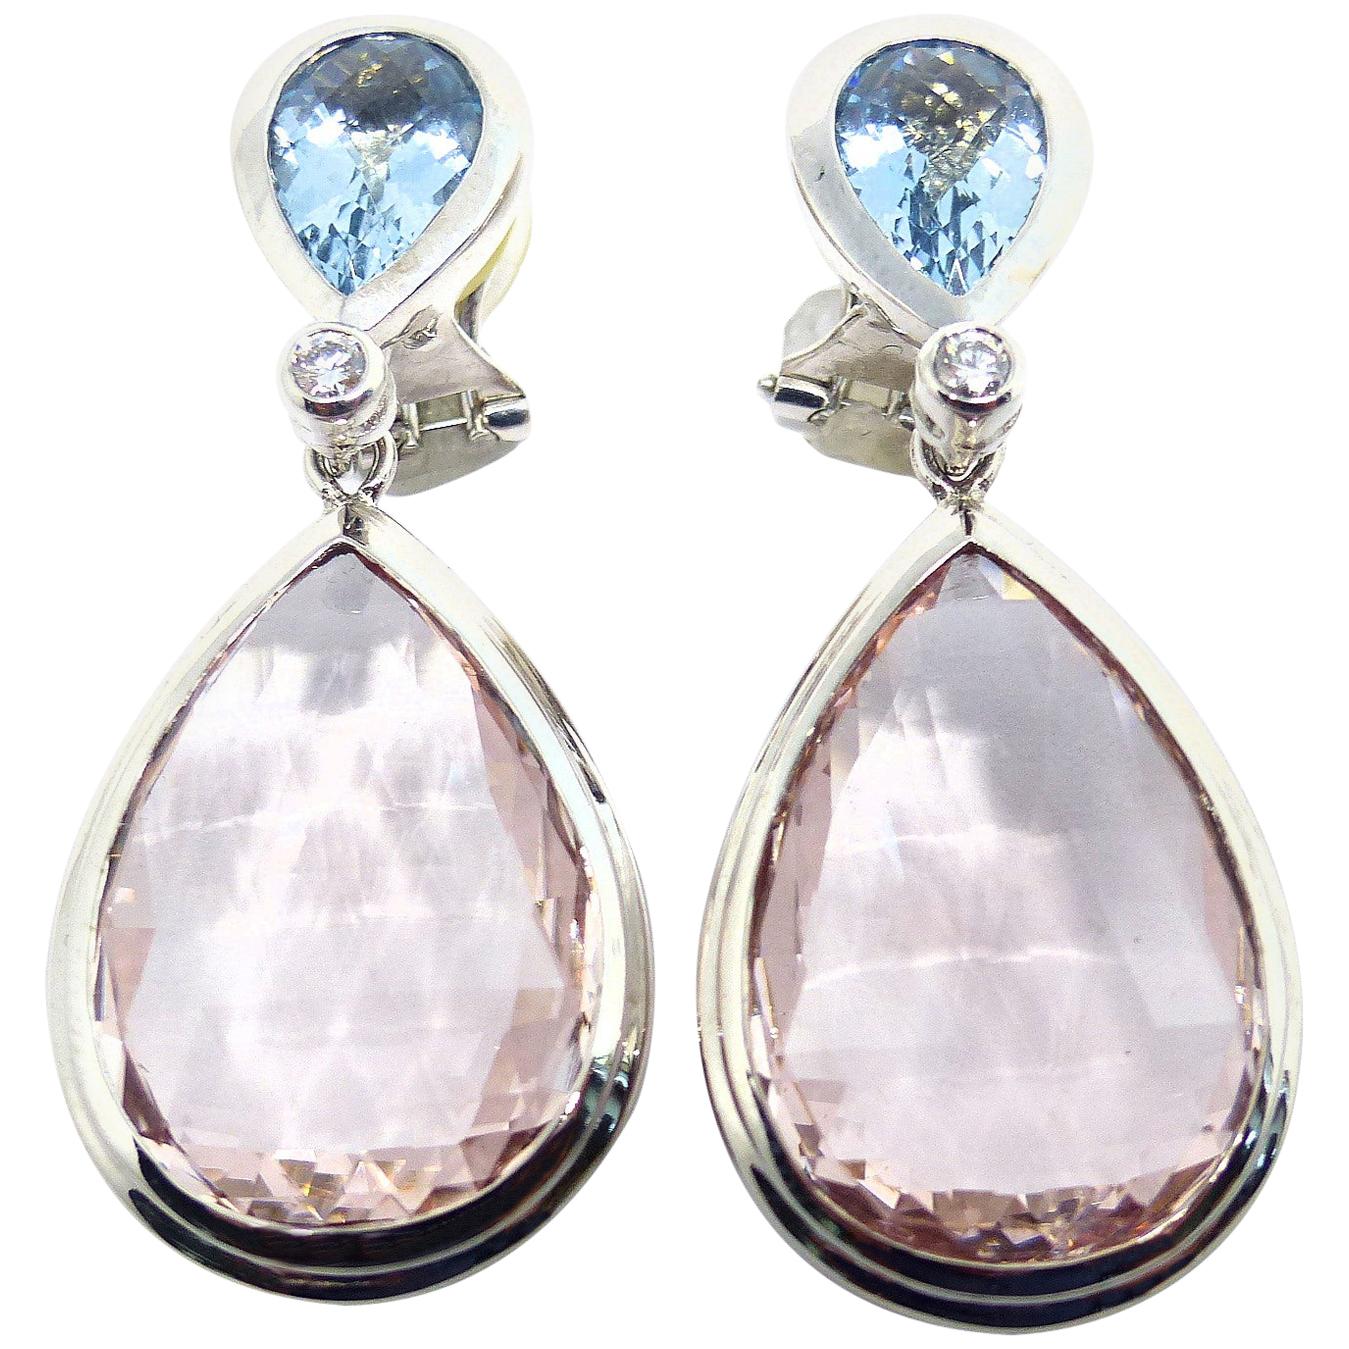 Earrings in White Gold with Morganites Briolets, Aquamarines & Diamonds